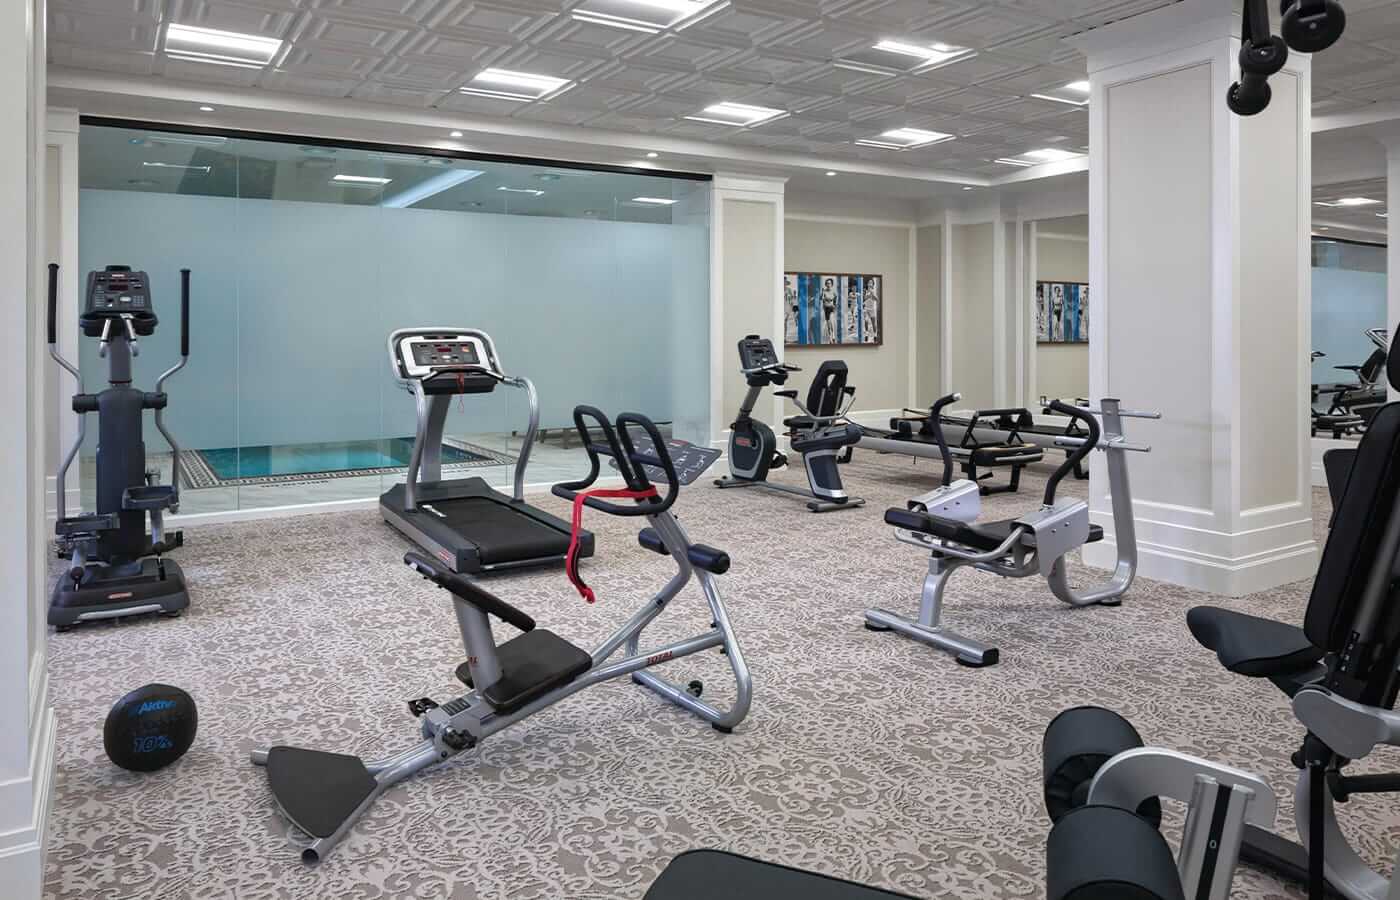 The on-site fitness centre features a variety of cardio equipments and free weights available for staff to use either on their own or with a personal trainer.